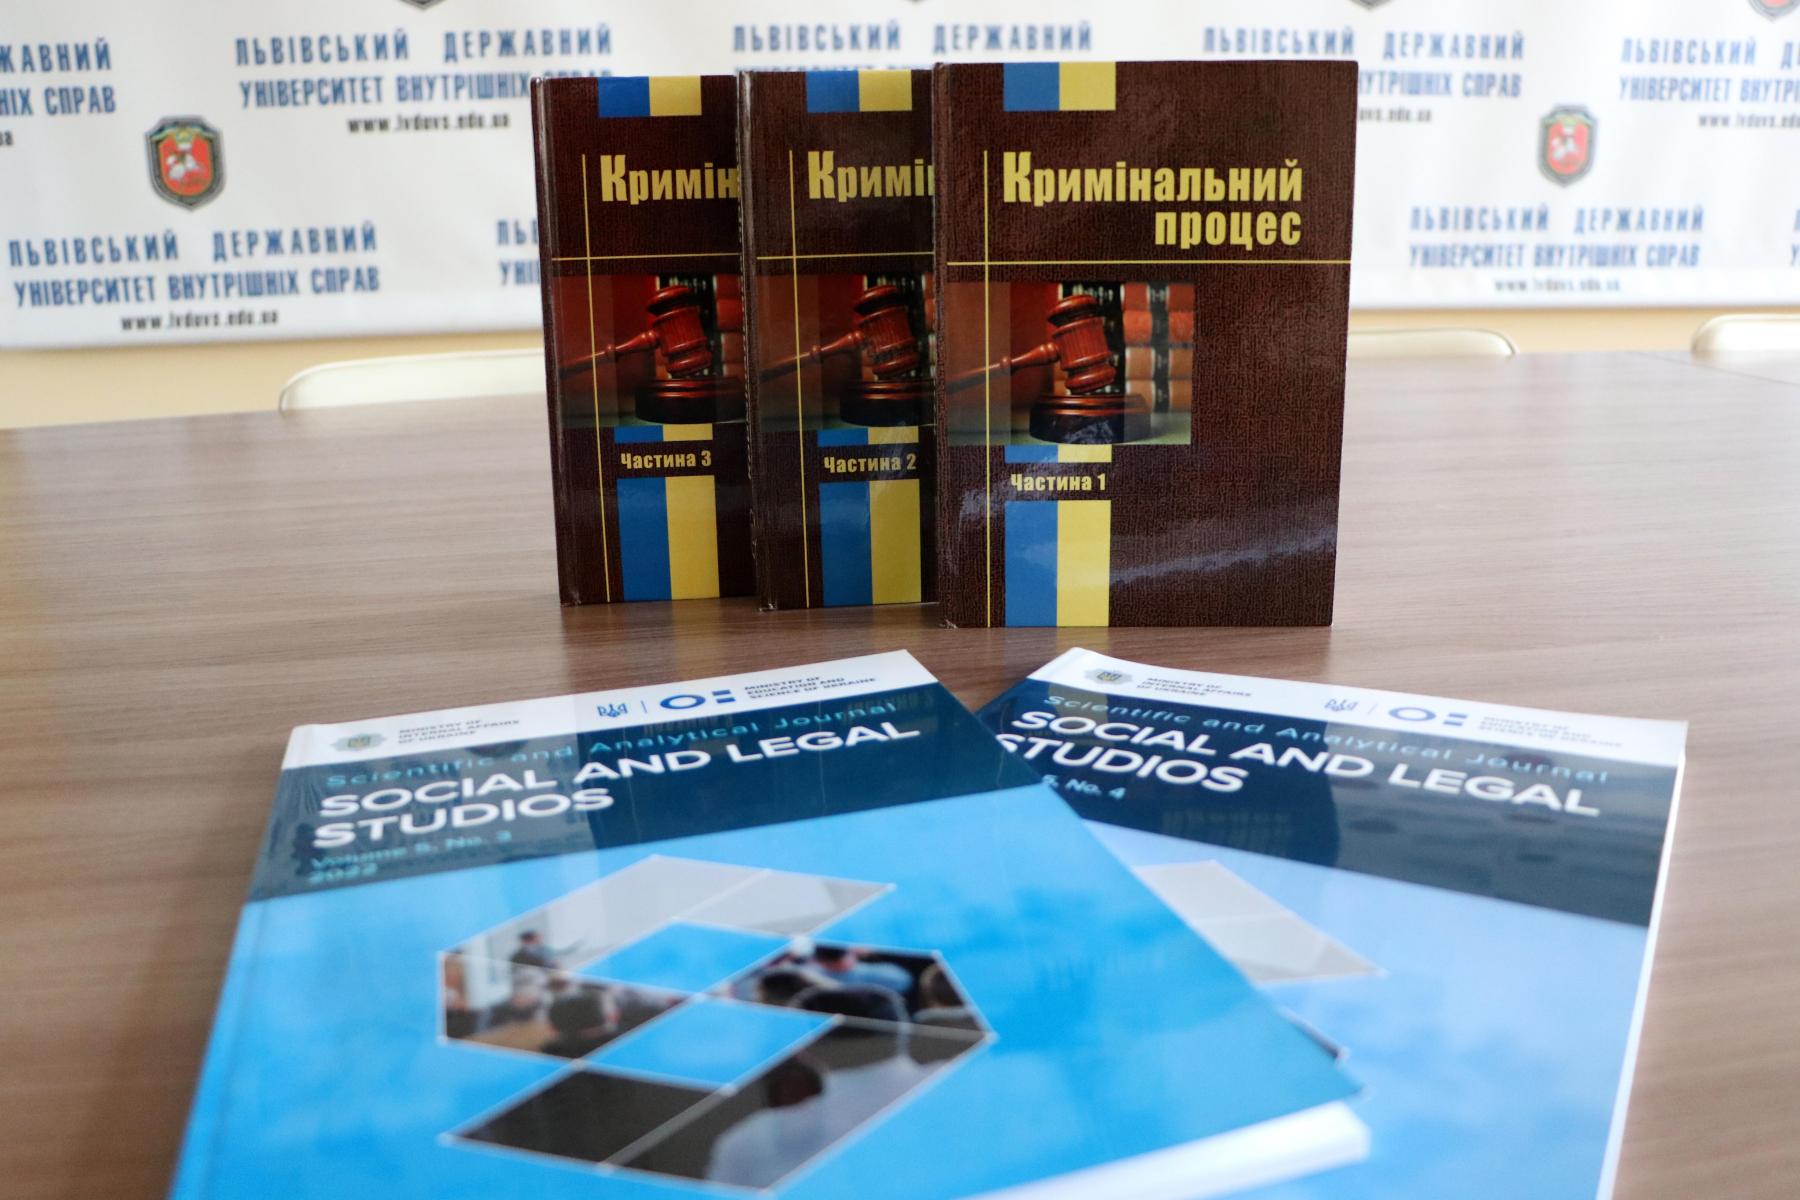 Lviv State University of Internal Affairs achieved recognition as one of the winners in the competition for the best scientific, technical, and career guidance products